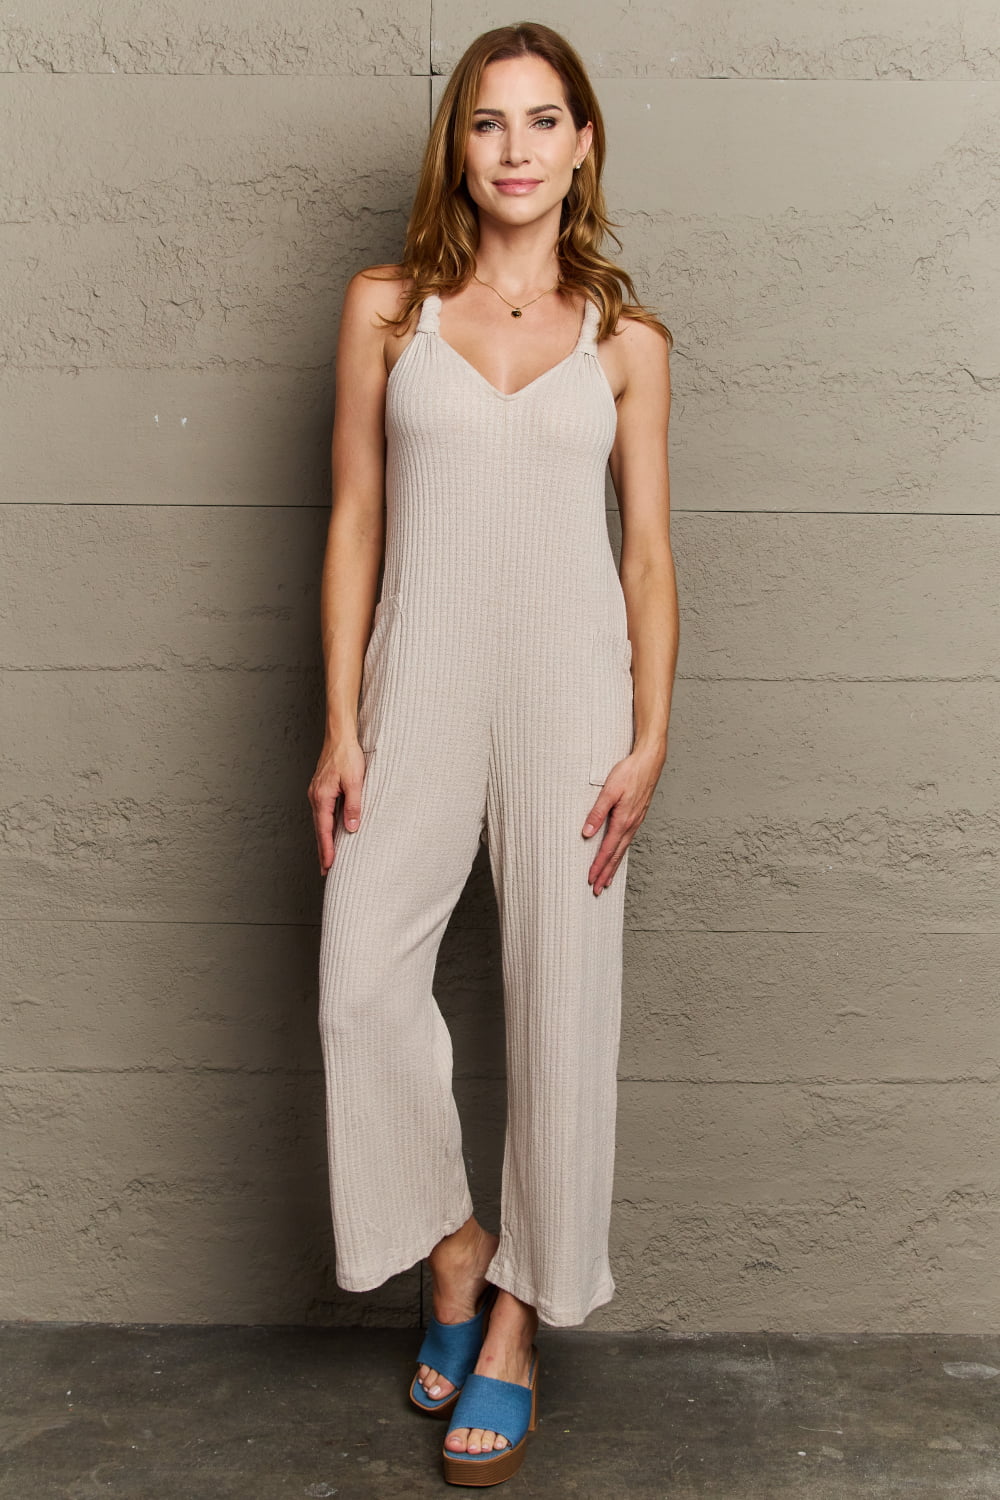 Don’t Get It Twisted Full Size Rib Knit Jumpsuit - Beige / S - Women’s Clothing & Accessories - Jumpsuits & Rompers